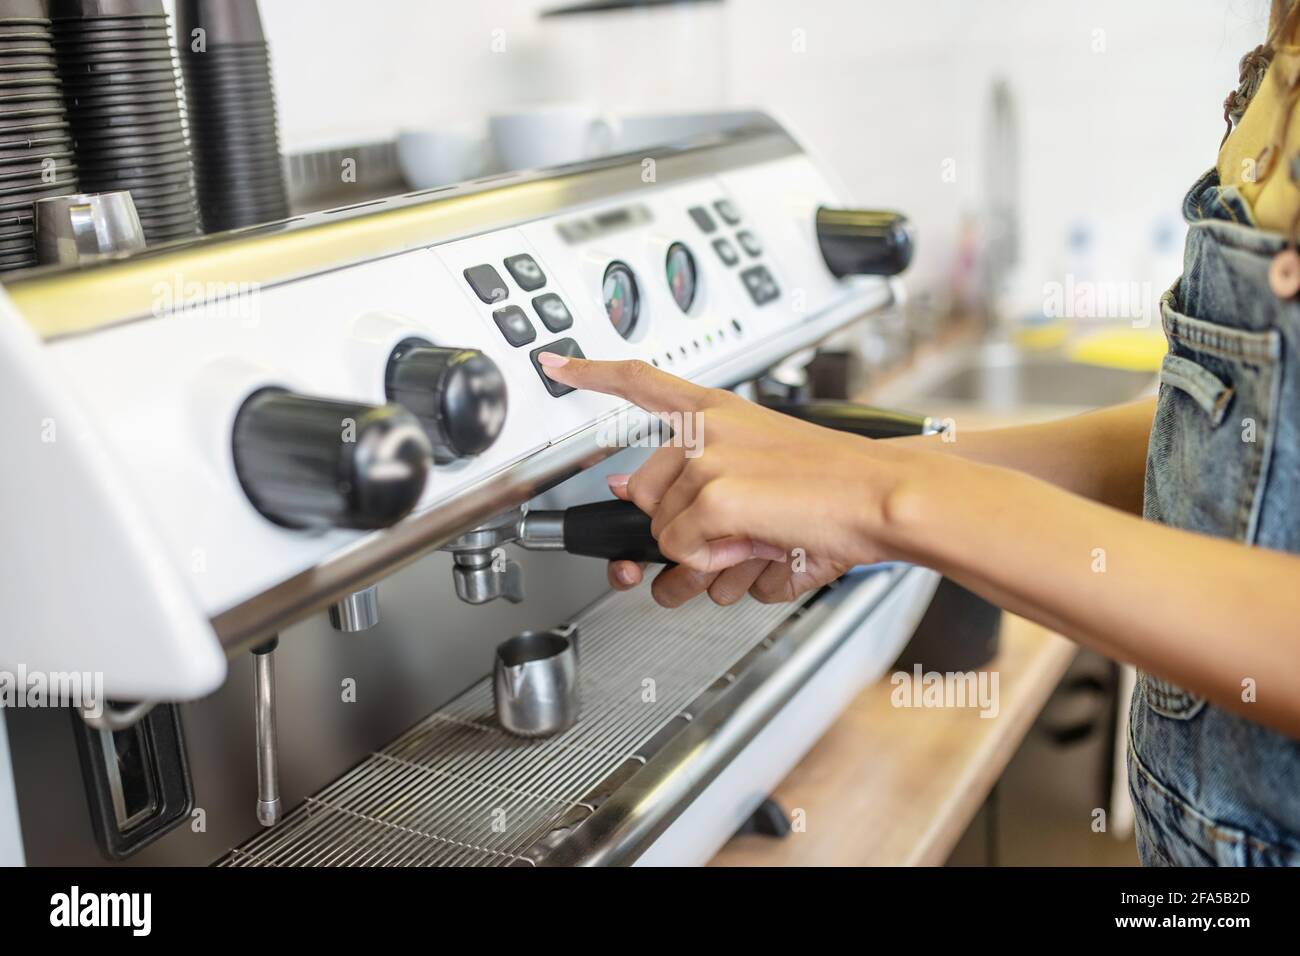 Female hand pressing button on panel of coffeemachine Stock Photo